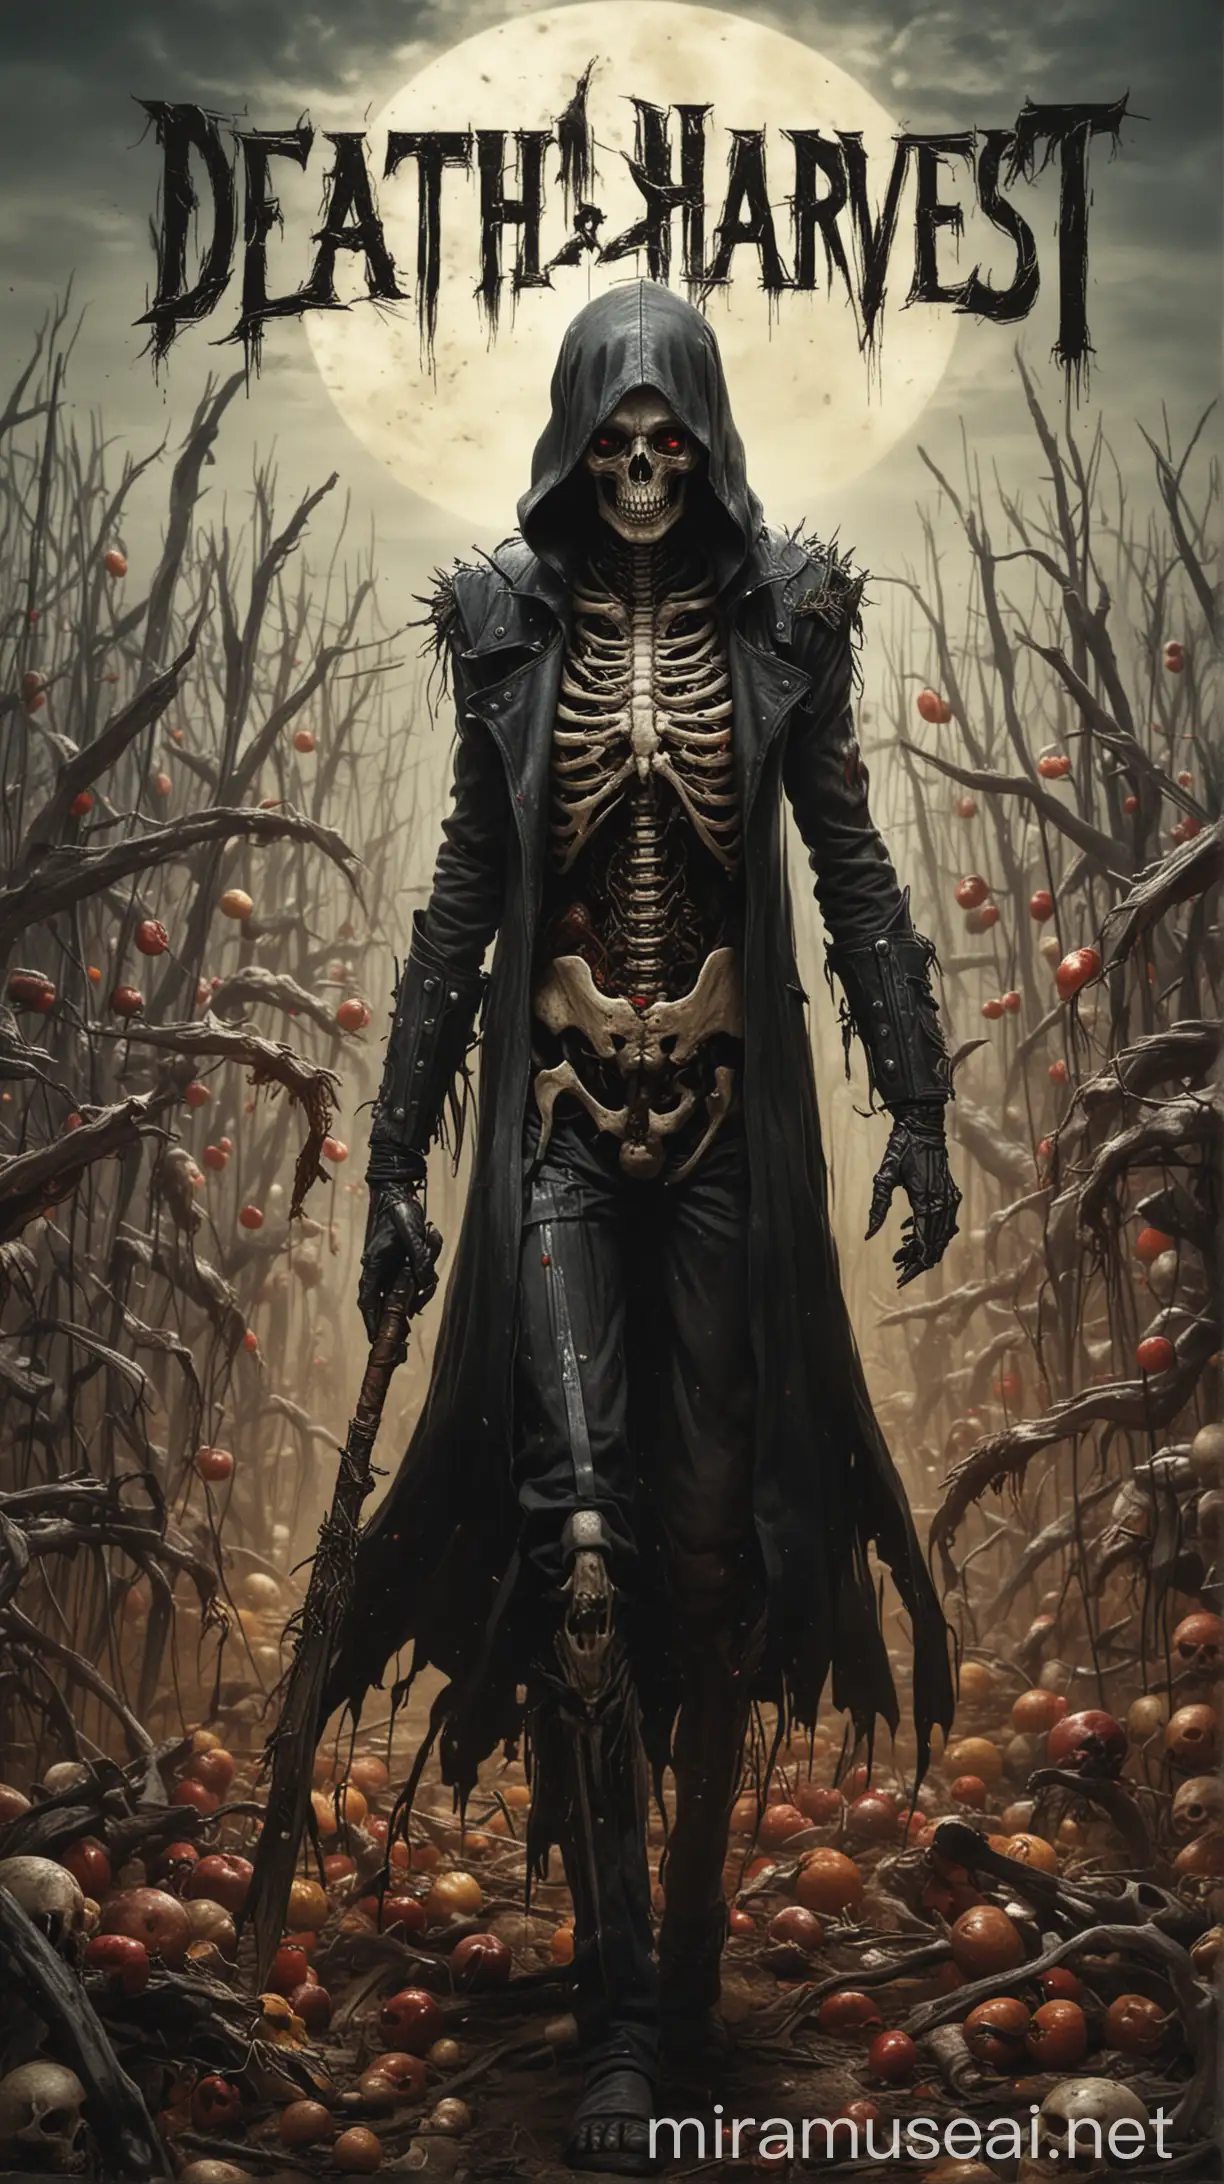 Grim Reaper Amidst a Field of Withered Flowers